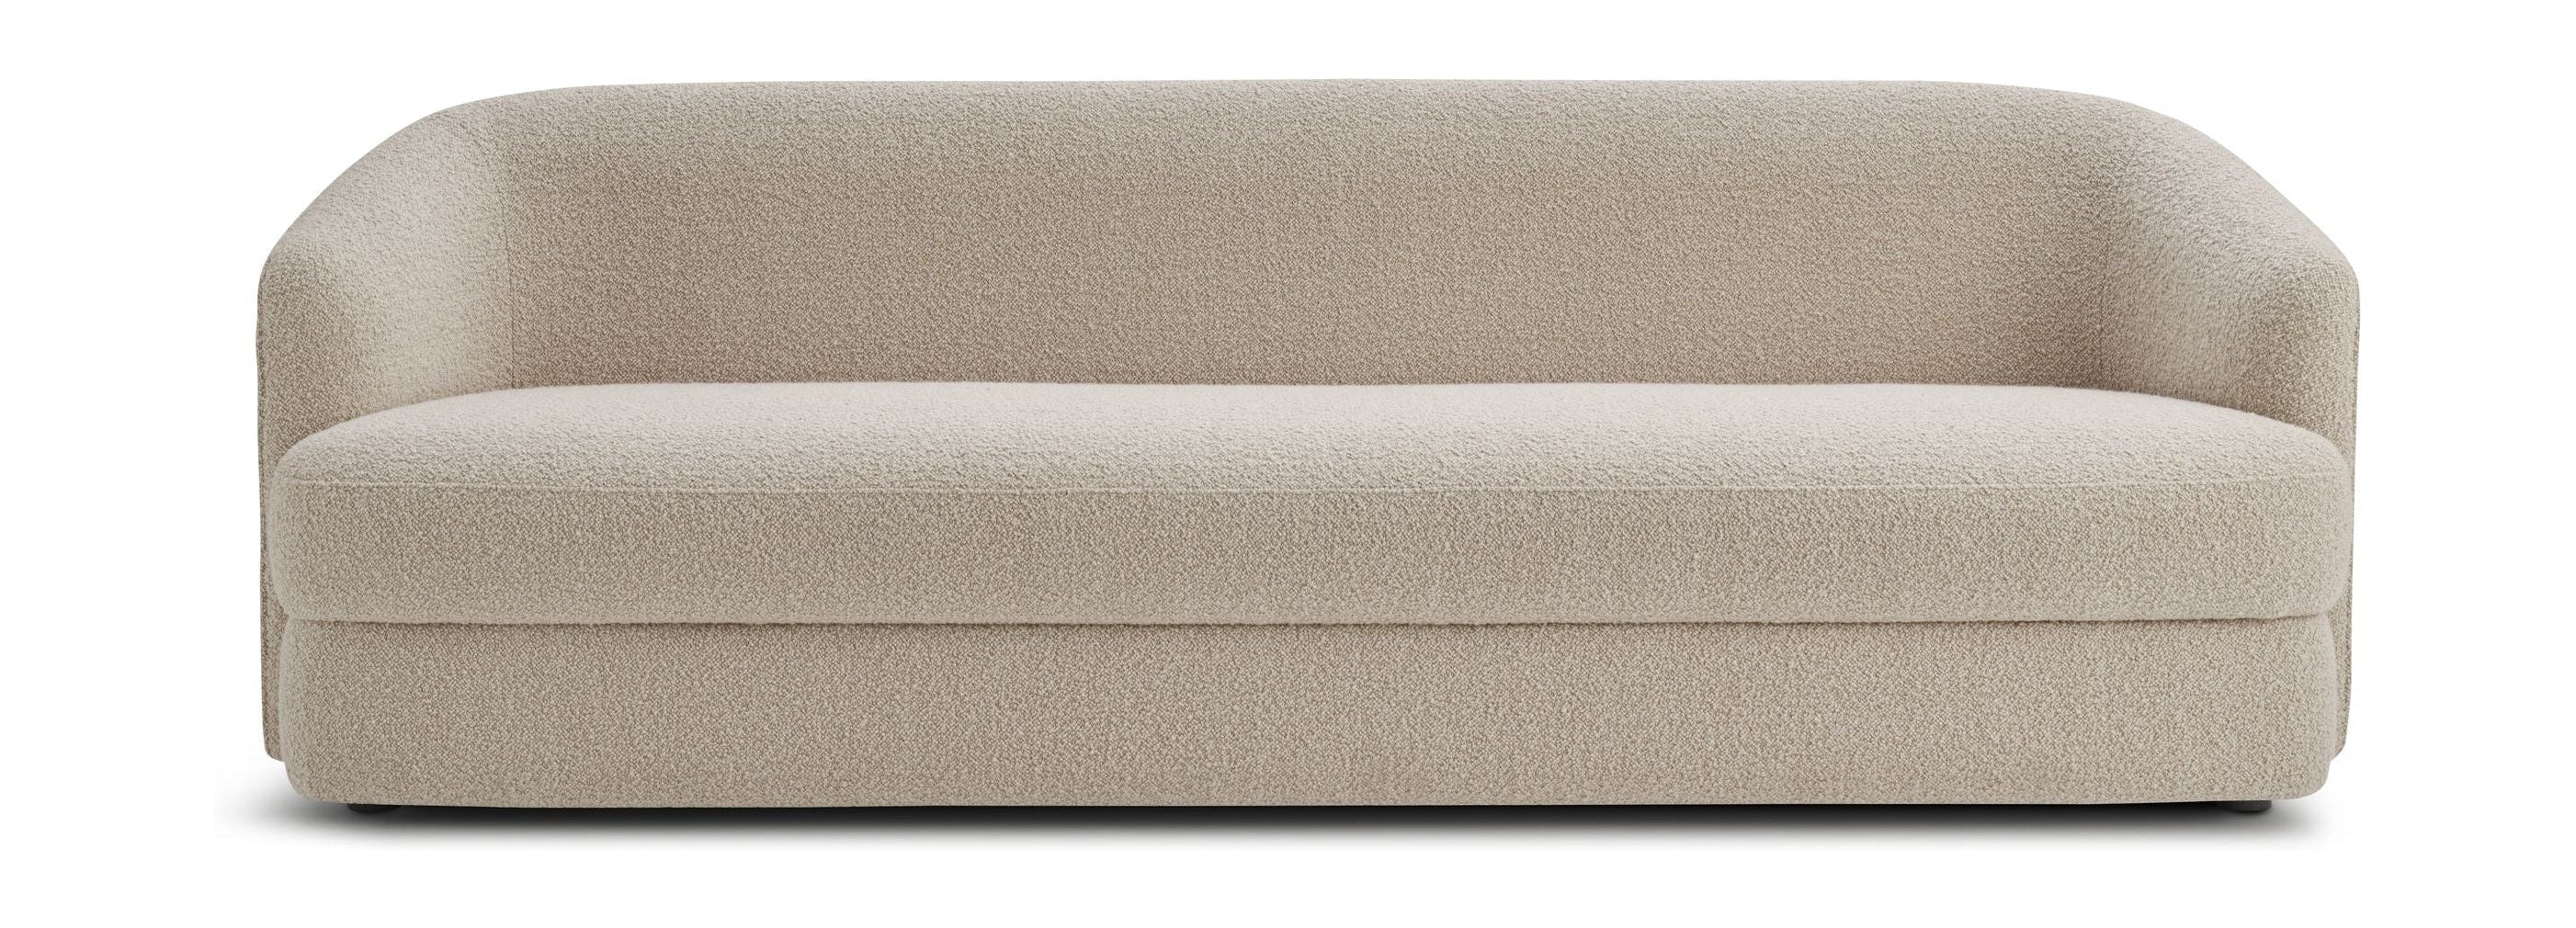 New Works Covent Sofa 3 -Sitzer, Sand